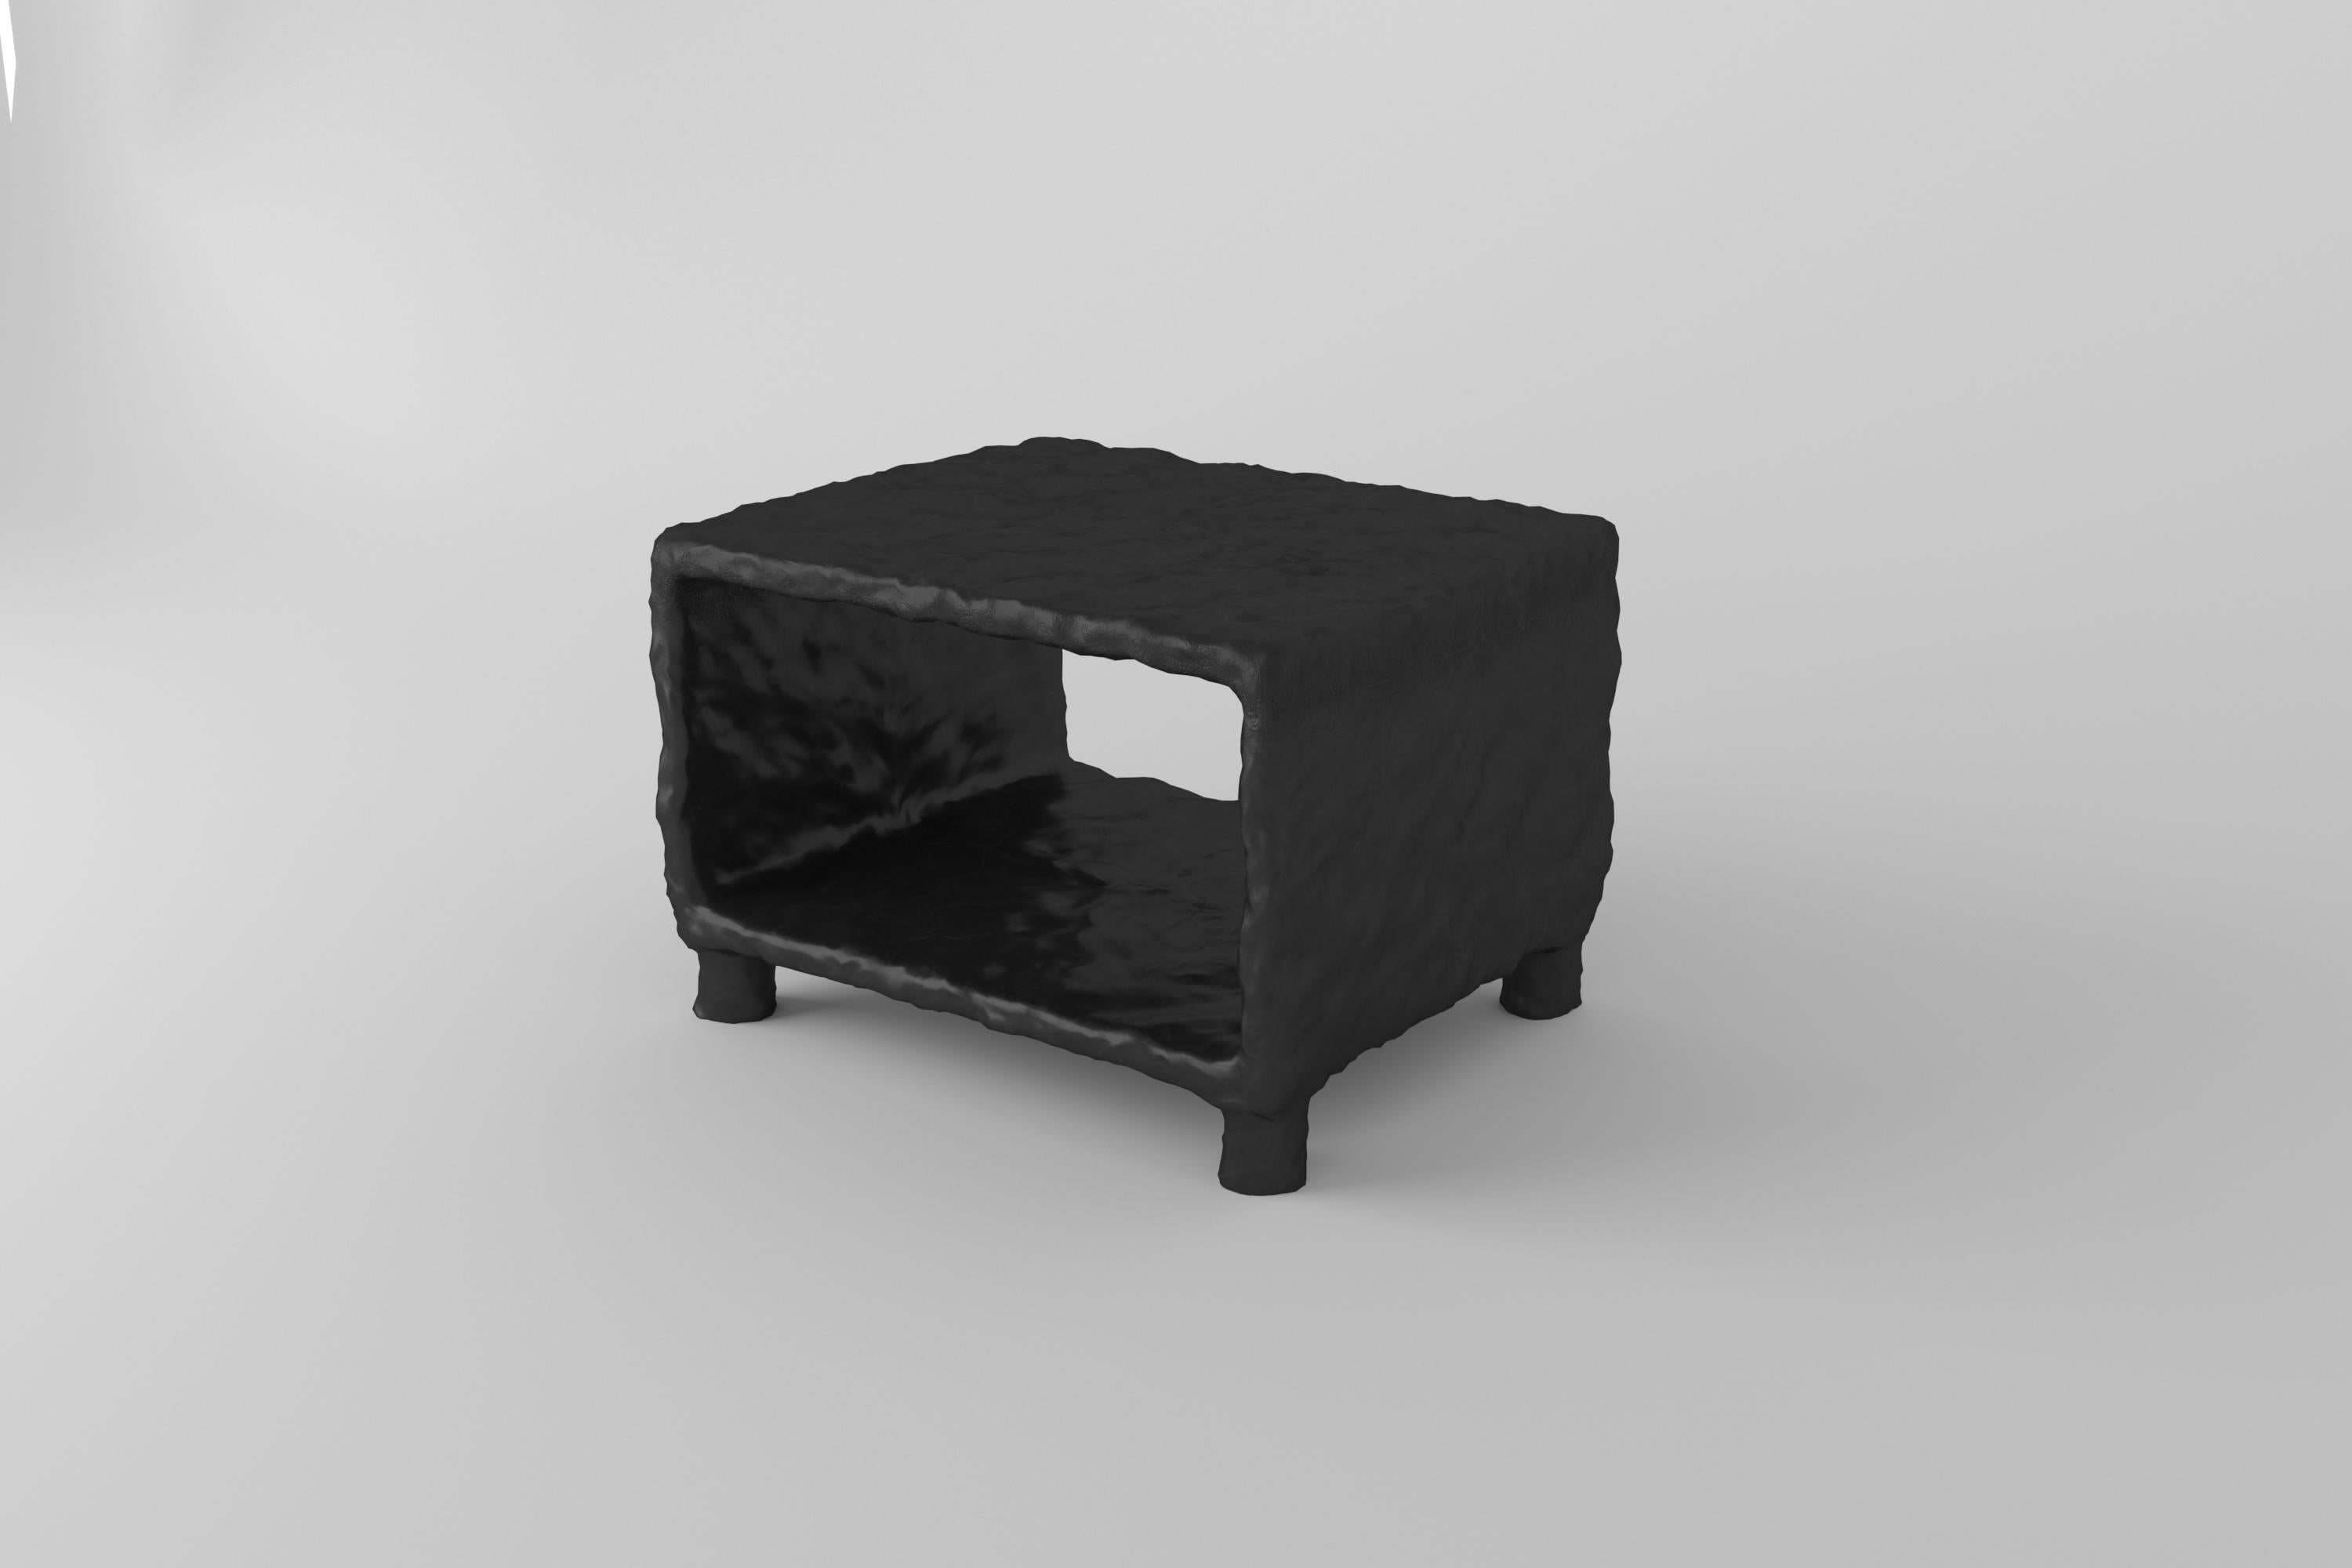 Sculpted Contemporary Night Stand by FAINA
Design: Victoriya Yakusha
Material: steel, flax rubber, biopolymer, cellulose
Dimensions and weight
Length 50 x height 35 x width 40 cm.
Weight: 20 kilos.

Other side tables from the same collection could